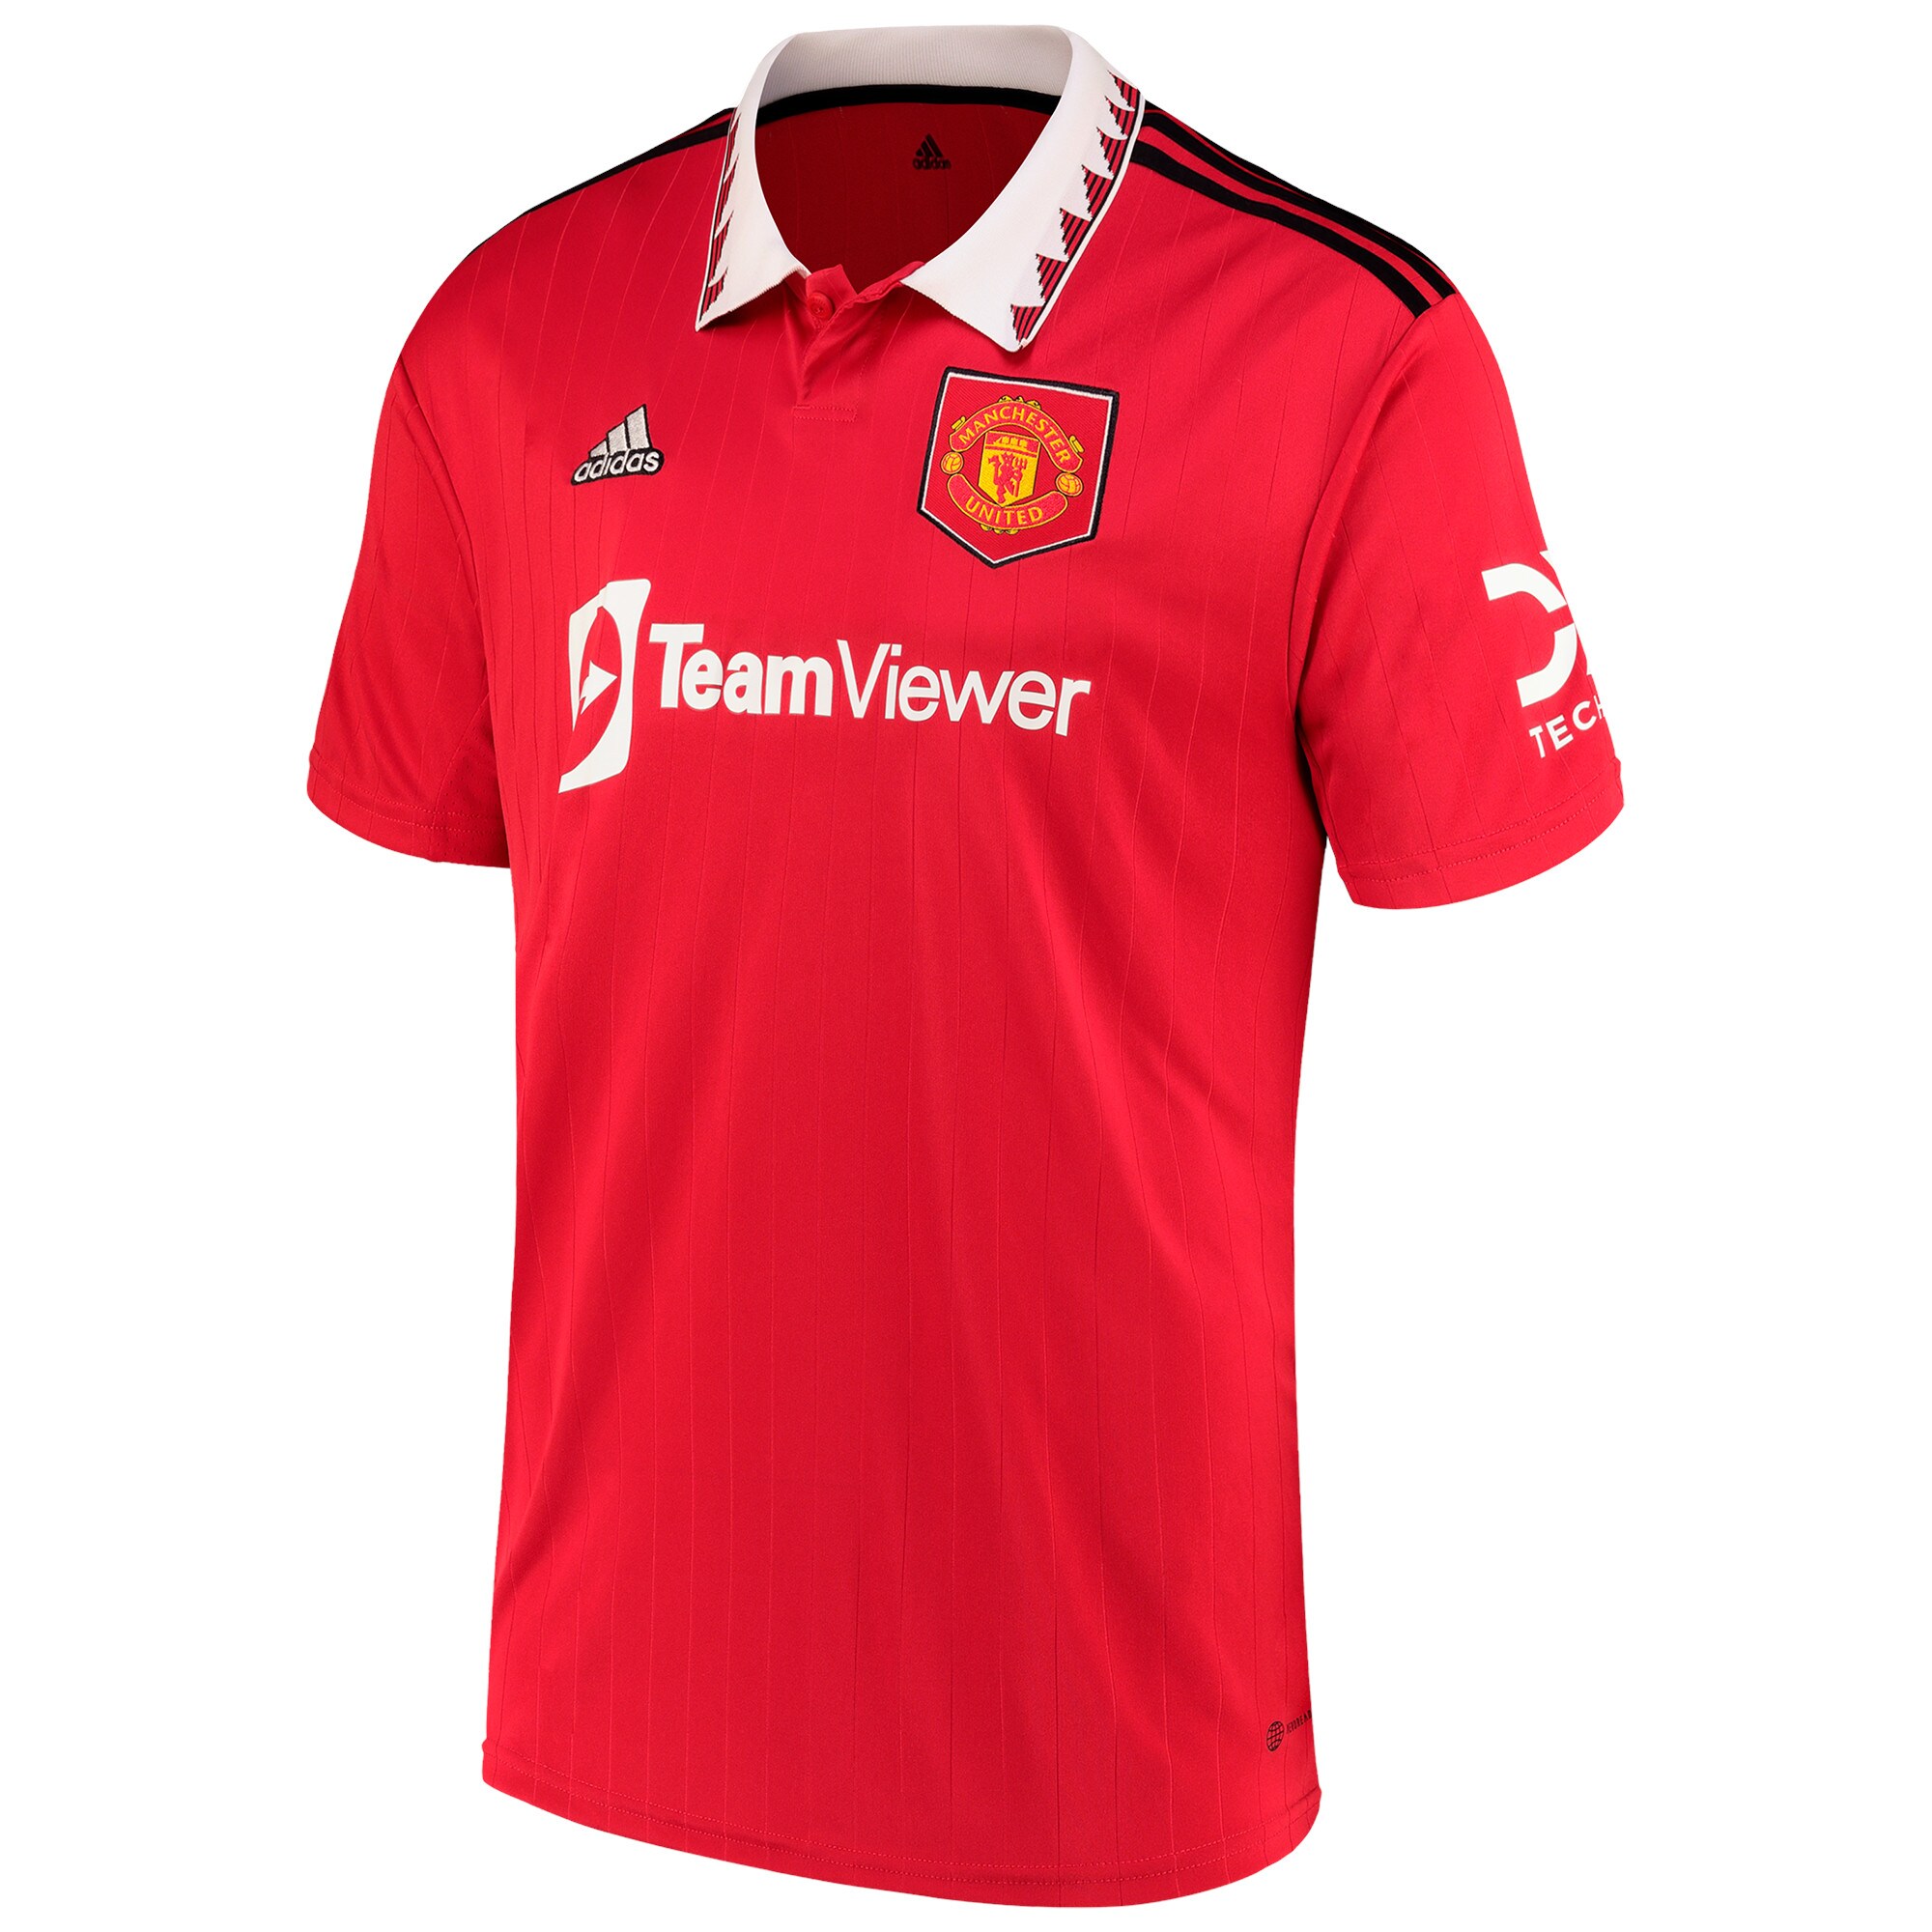 Manchester United Cup Home Shirt 2022-23 with Toone 7 printing